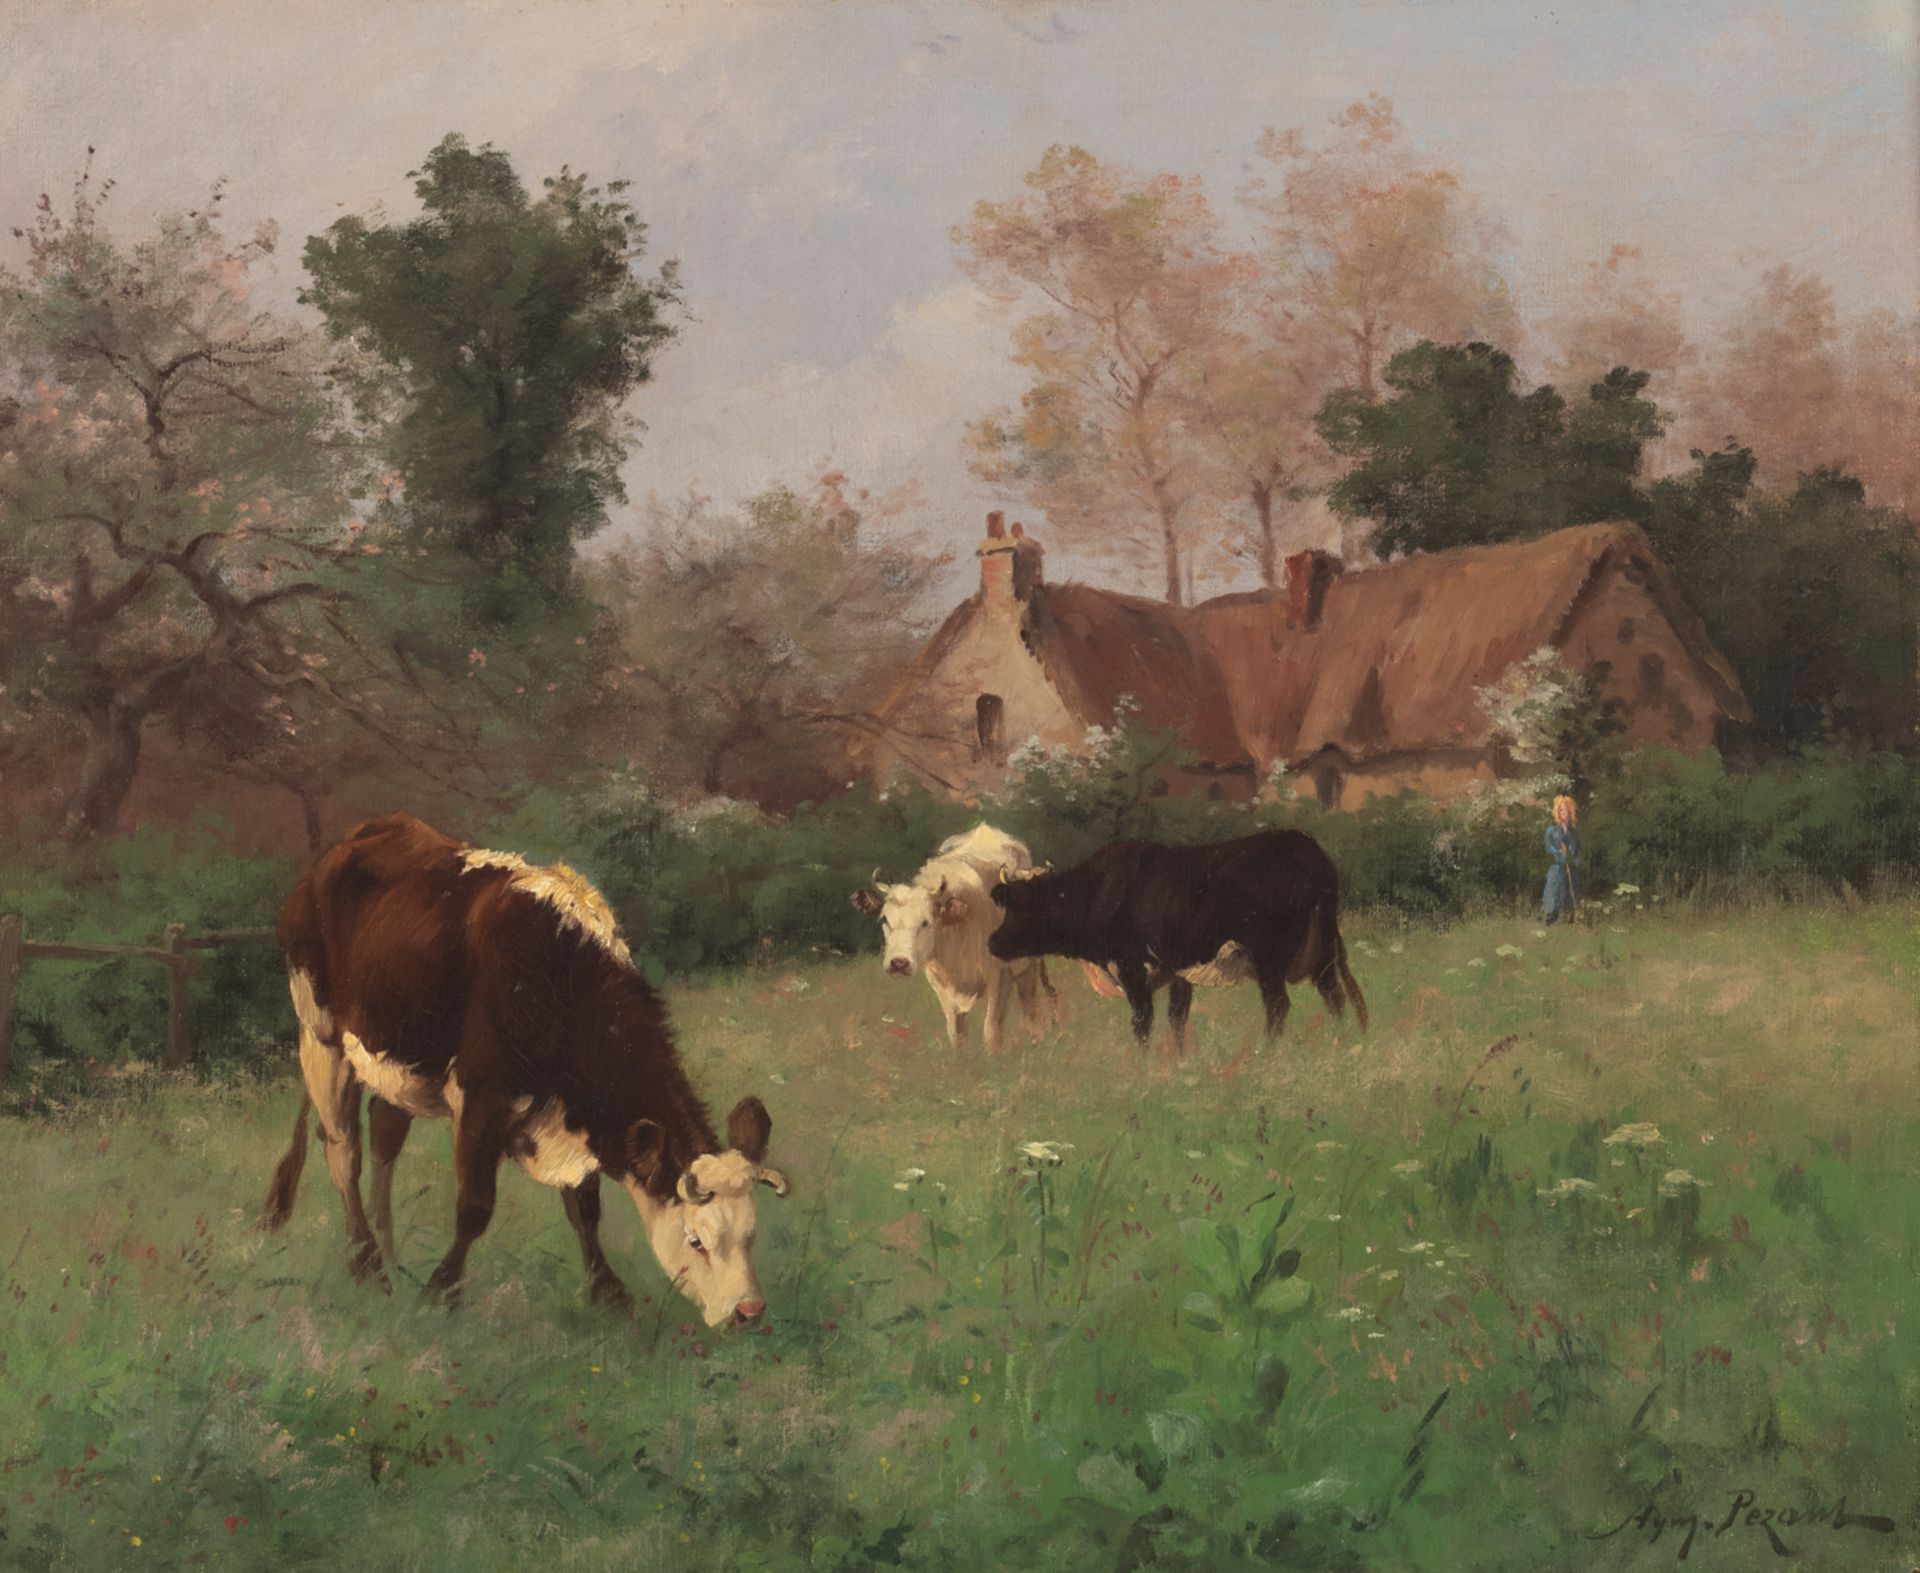 Pezant A., a pastoral view with grazing cows, oil on canvas, 54 x 65 cm